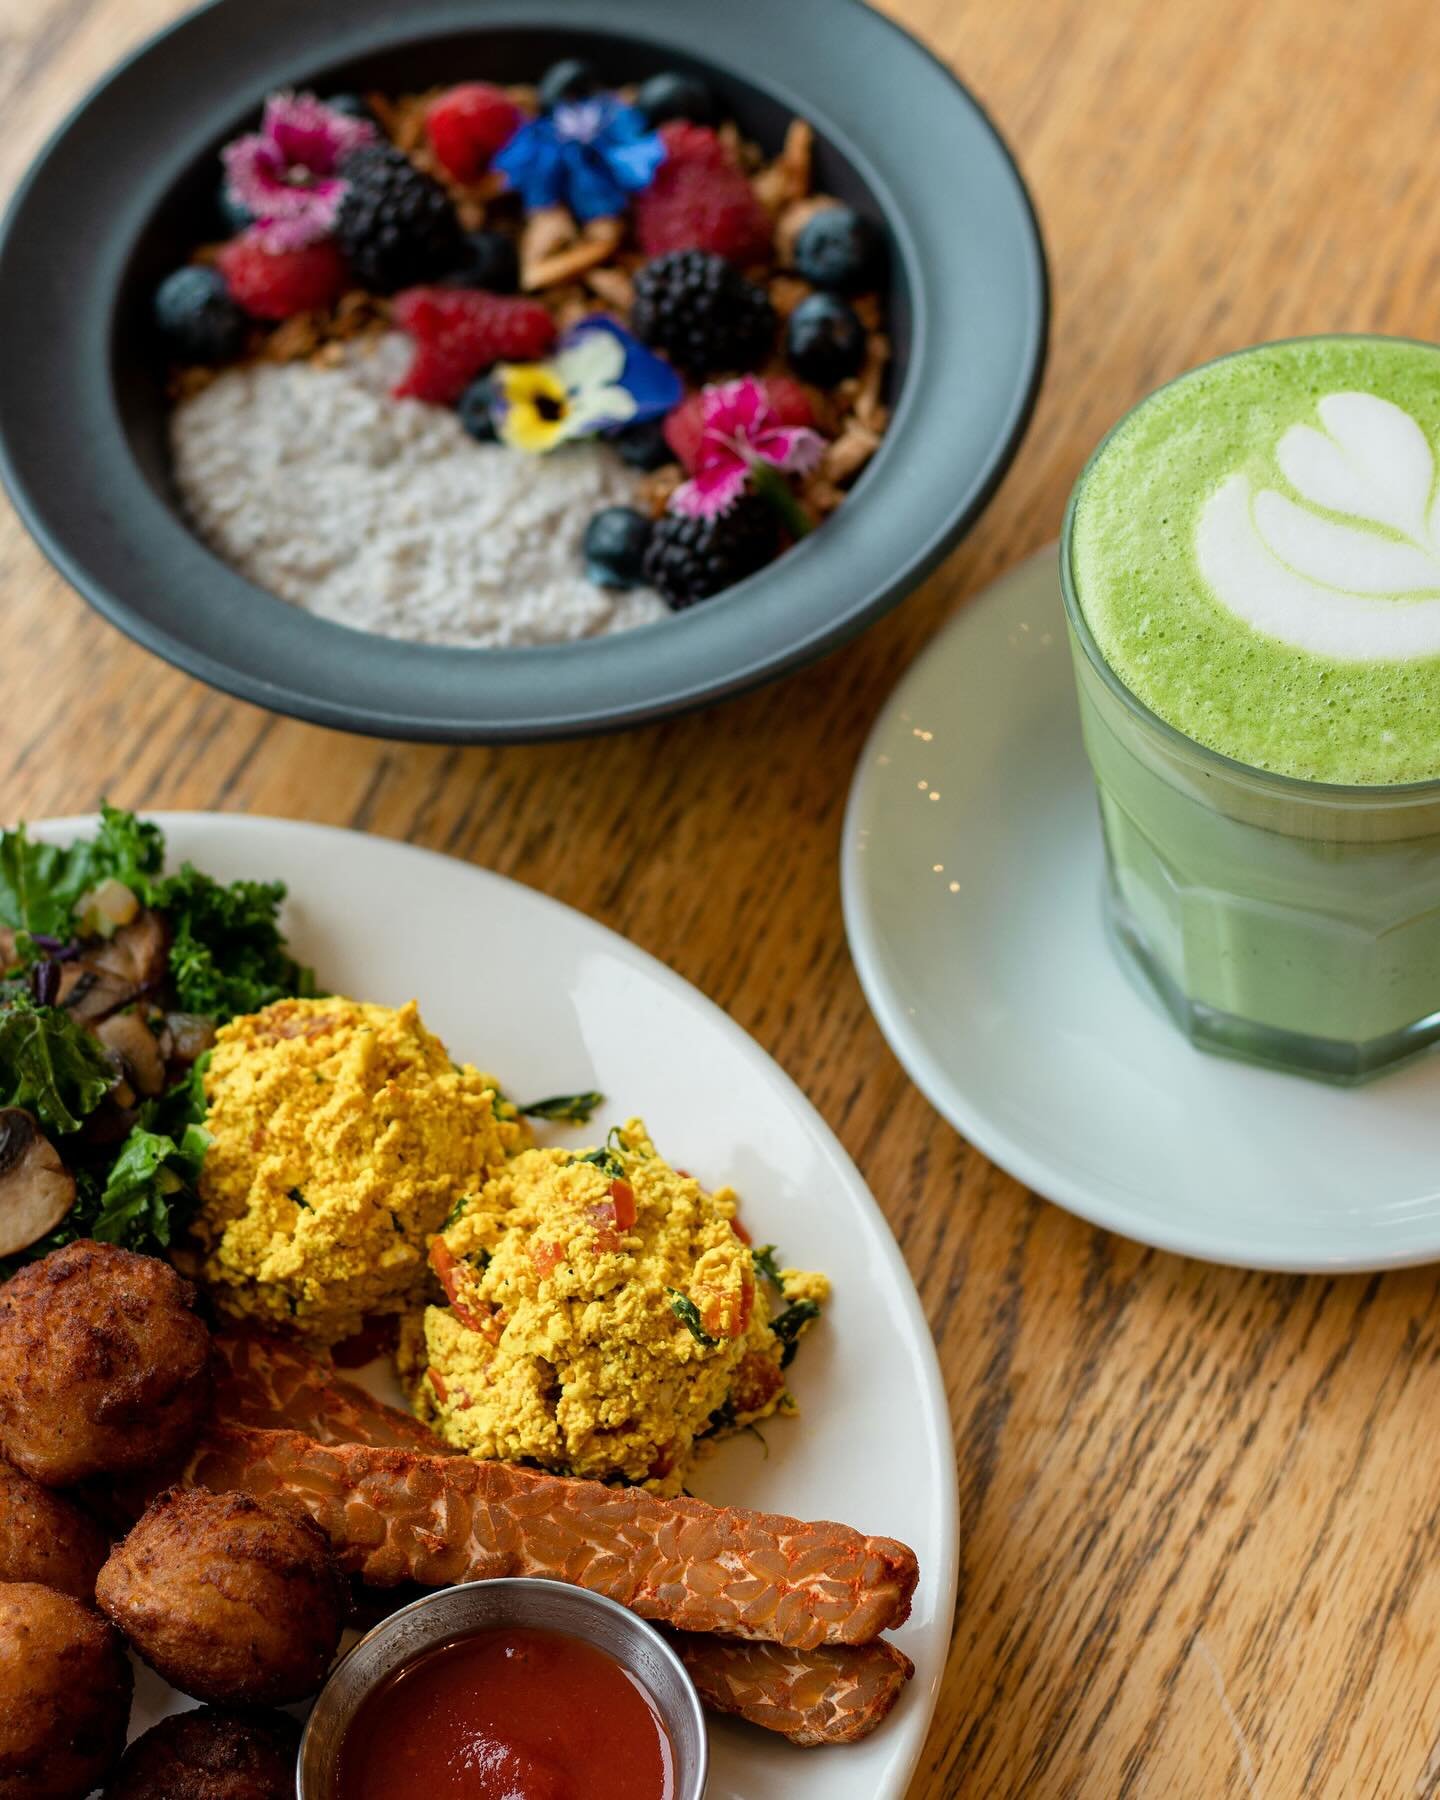 LONG WEEKEND BRUNCH IS ON!! 

The best plant based brunch in town ✅

Healthy ✔️
Plant based ✔️
Beautiful ✔️
Delicious ✔️
Energizing ✔️

Brunch doesn&rsquo;t have to be boring. Sprinkle in some food magic into your May long weekend with us. 

Brunch i